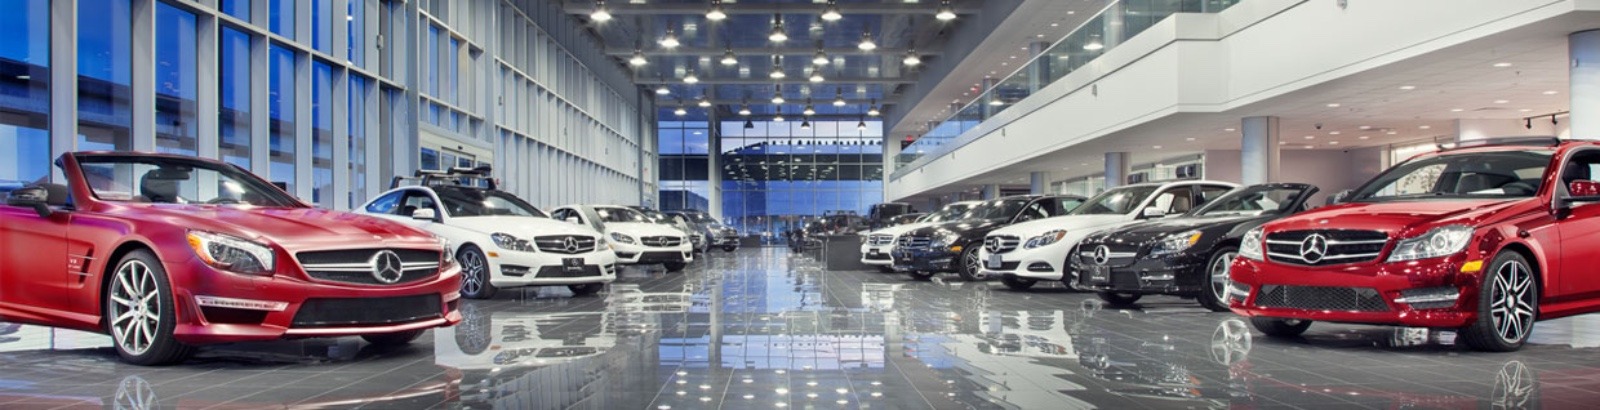 Mercedes-Benz Vancouver Luxury Car Dealership Completed 2013